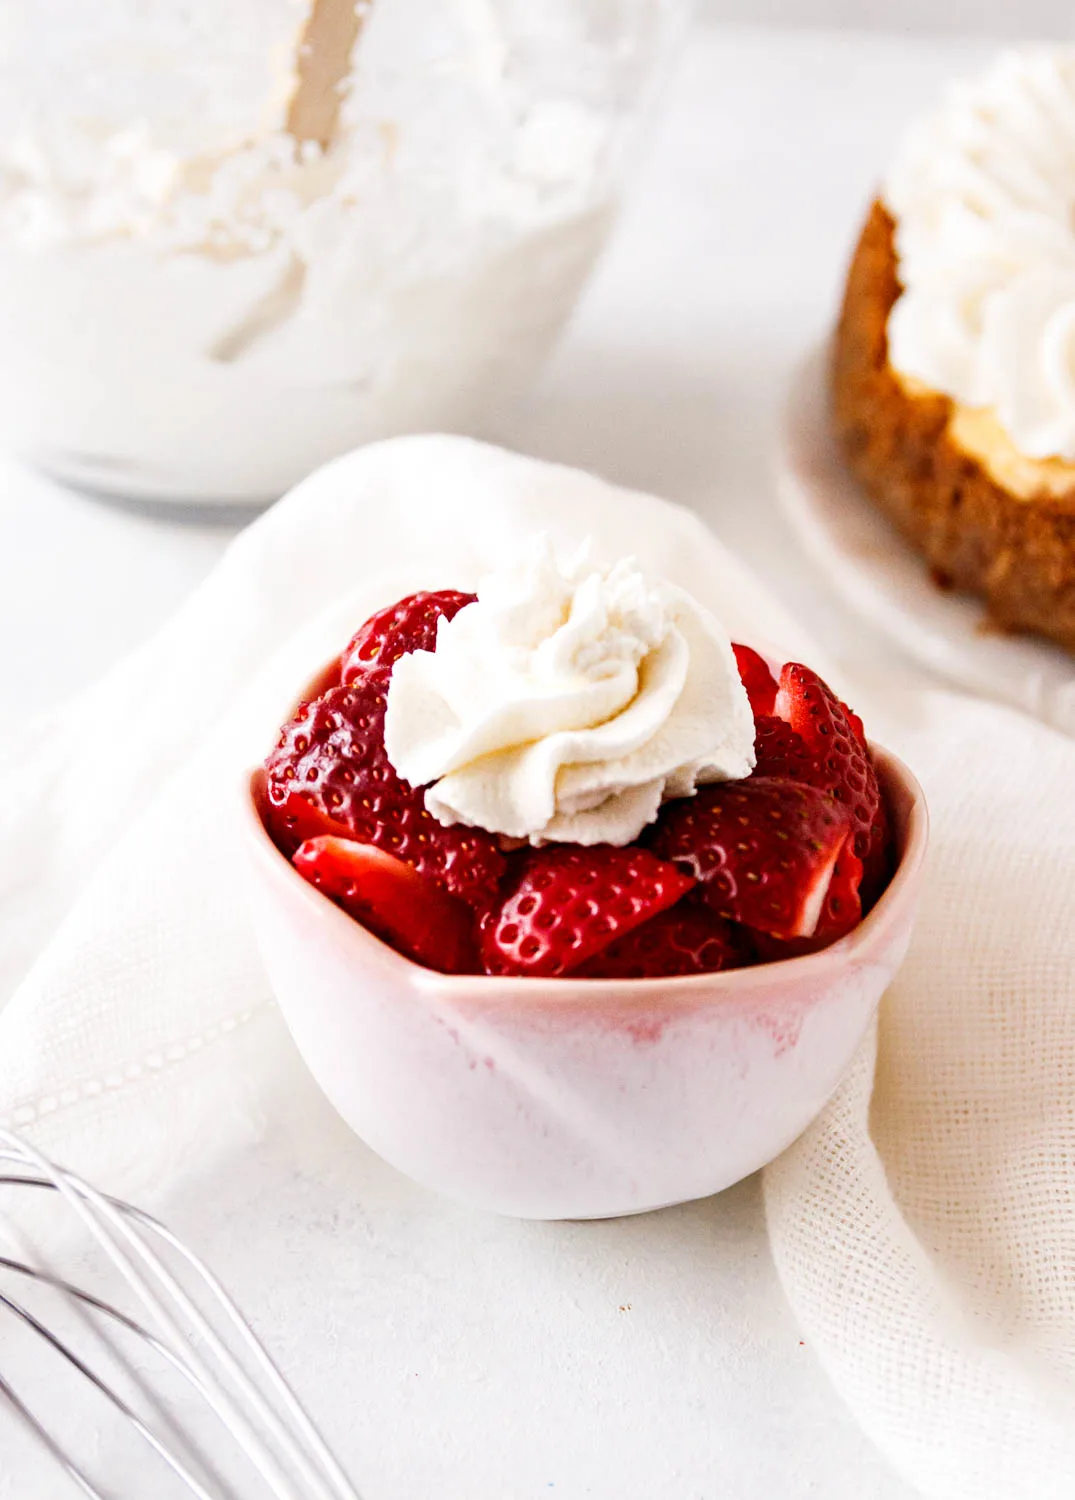 Serving suggestion image showing a bowl of strawberries with whipped cream.